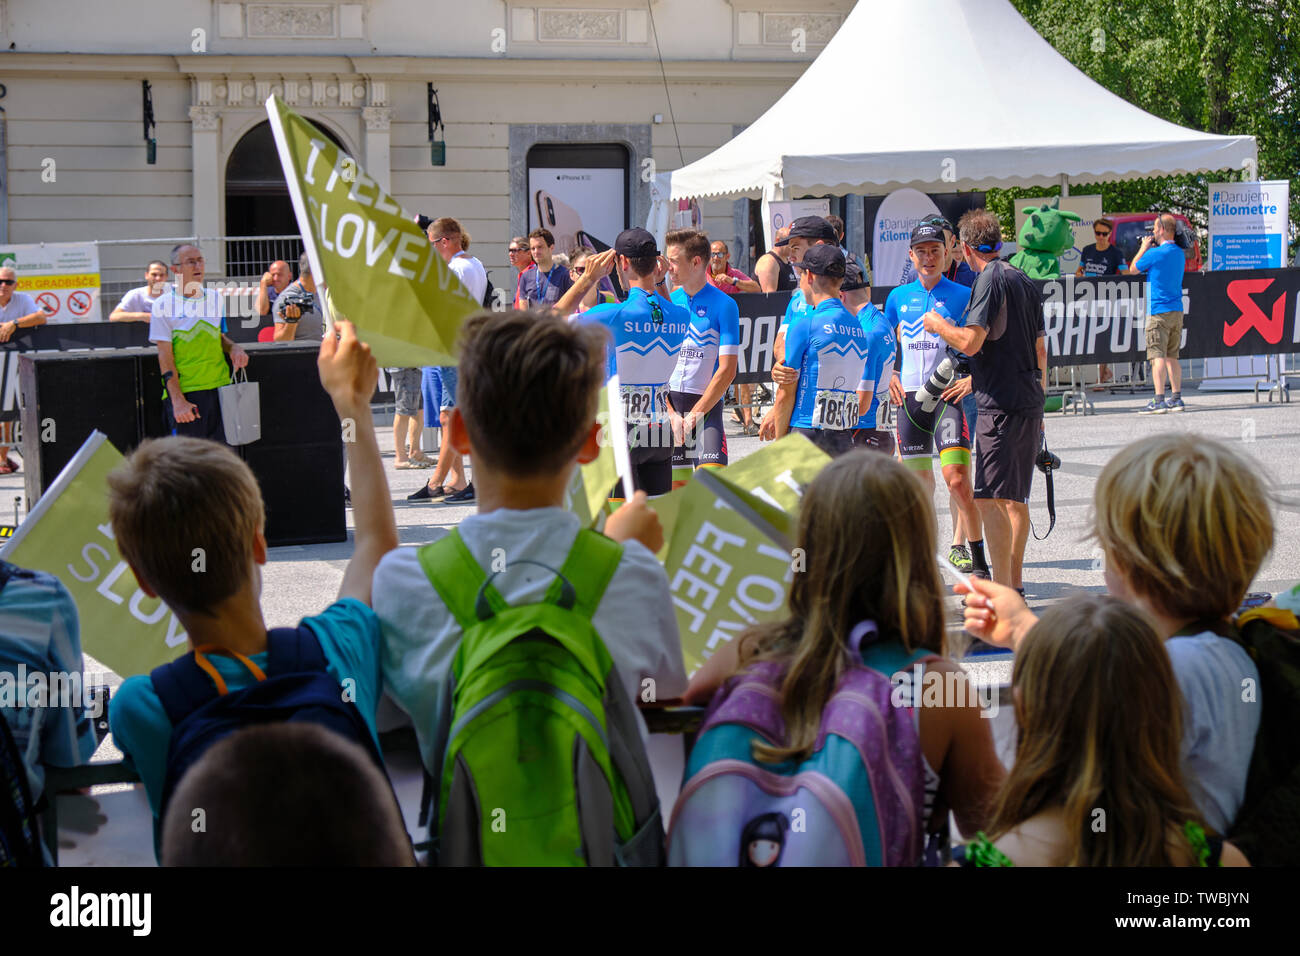 Children waving Flag as Team Slovenia is introduced at departure of Tour of Slovenia stage one race, Ljubljana, Slovenia - June 19, 2019 Stock Photo